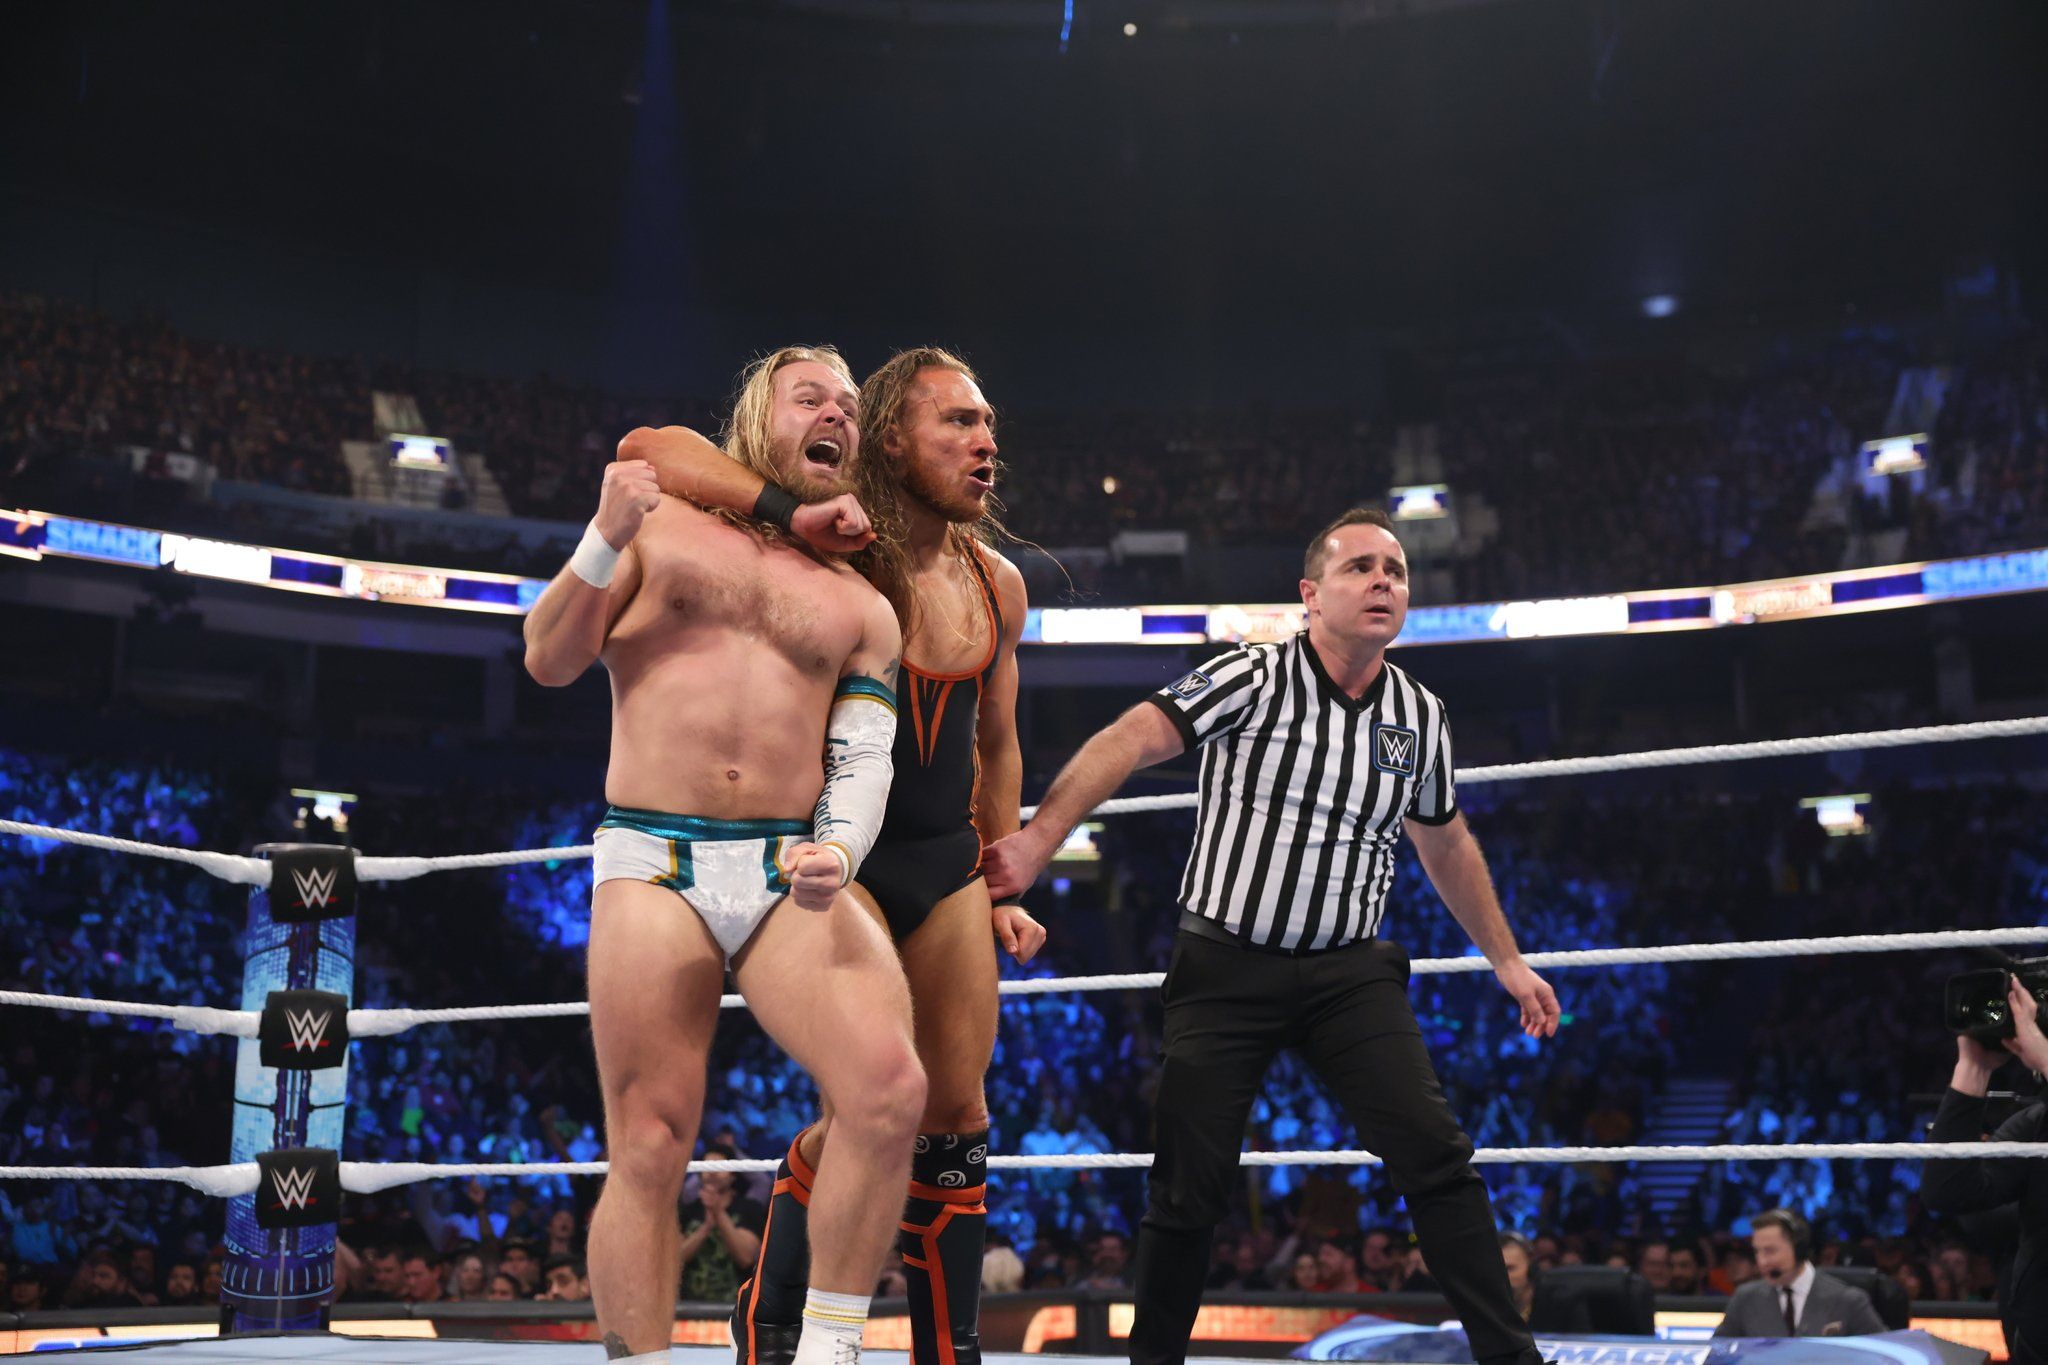 Bate and Dunne celebrate another win together (WWE)